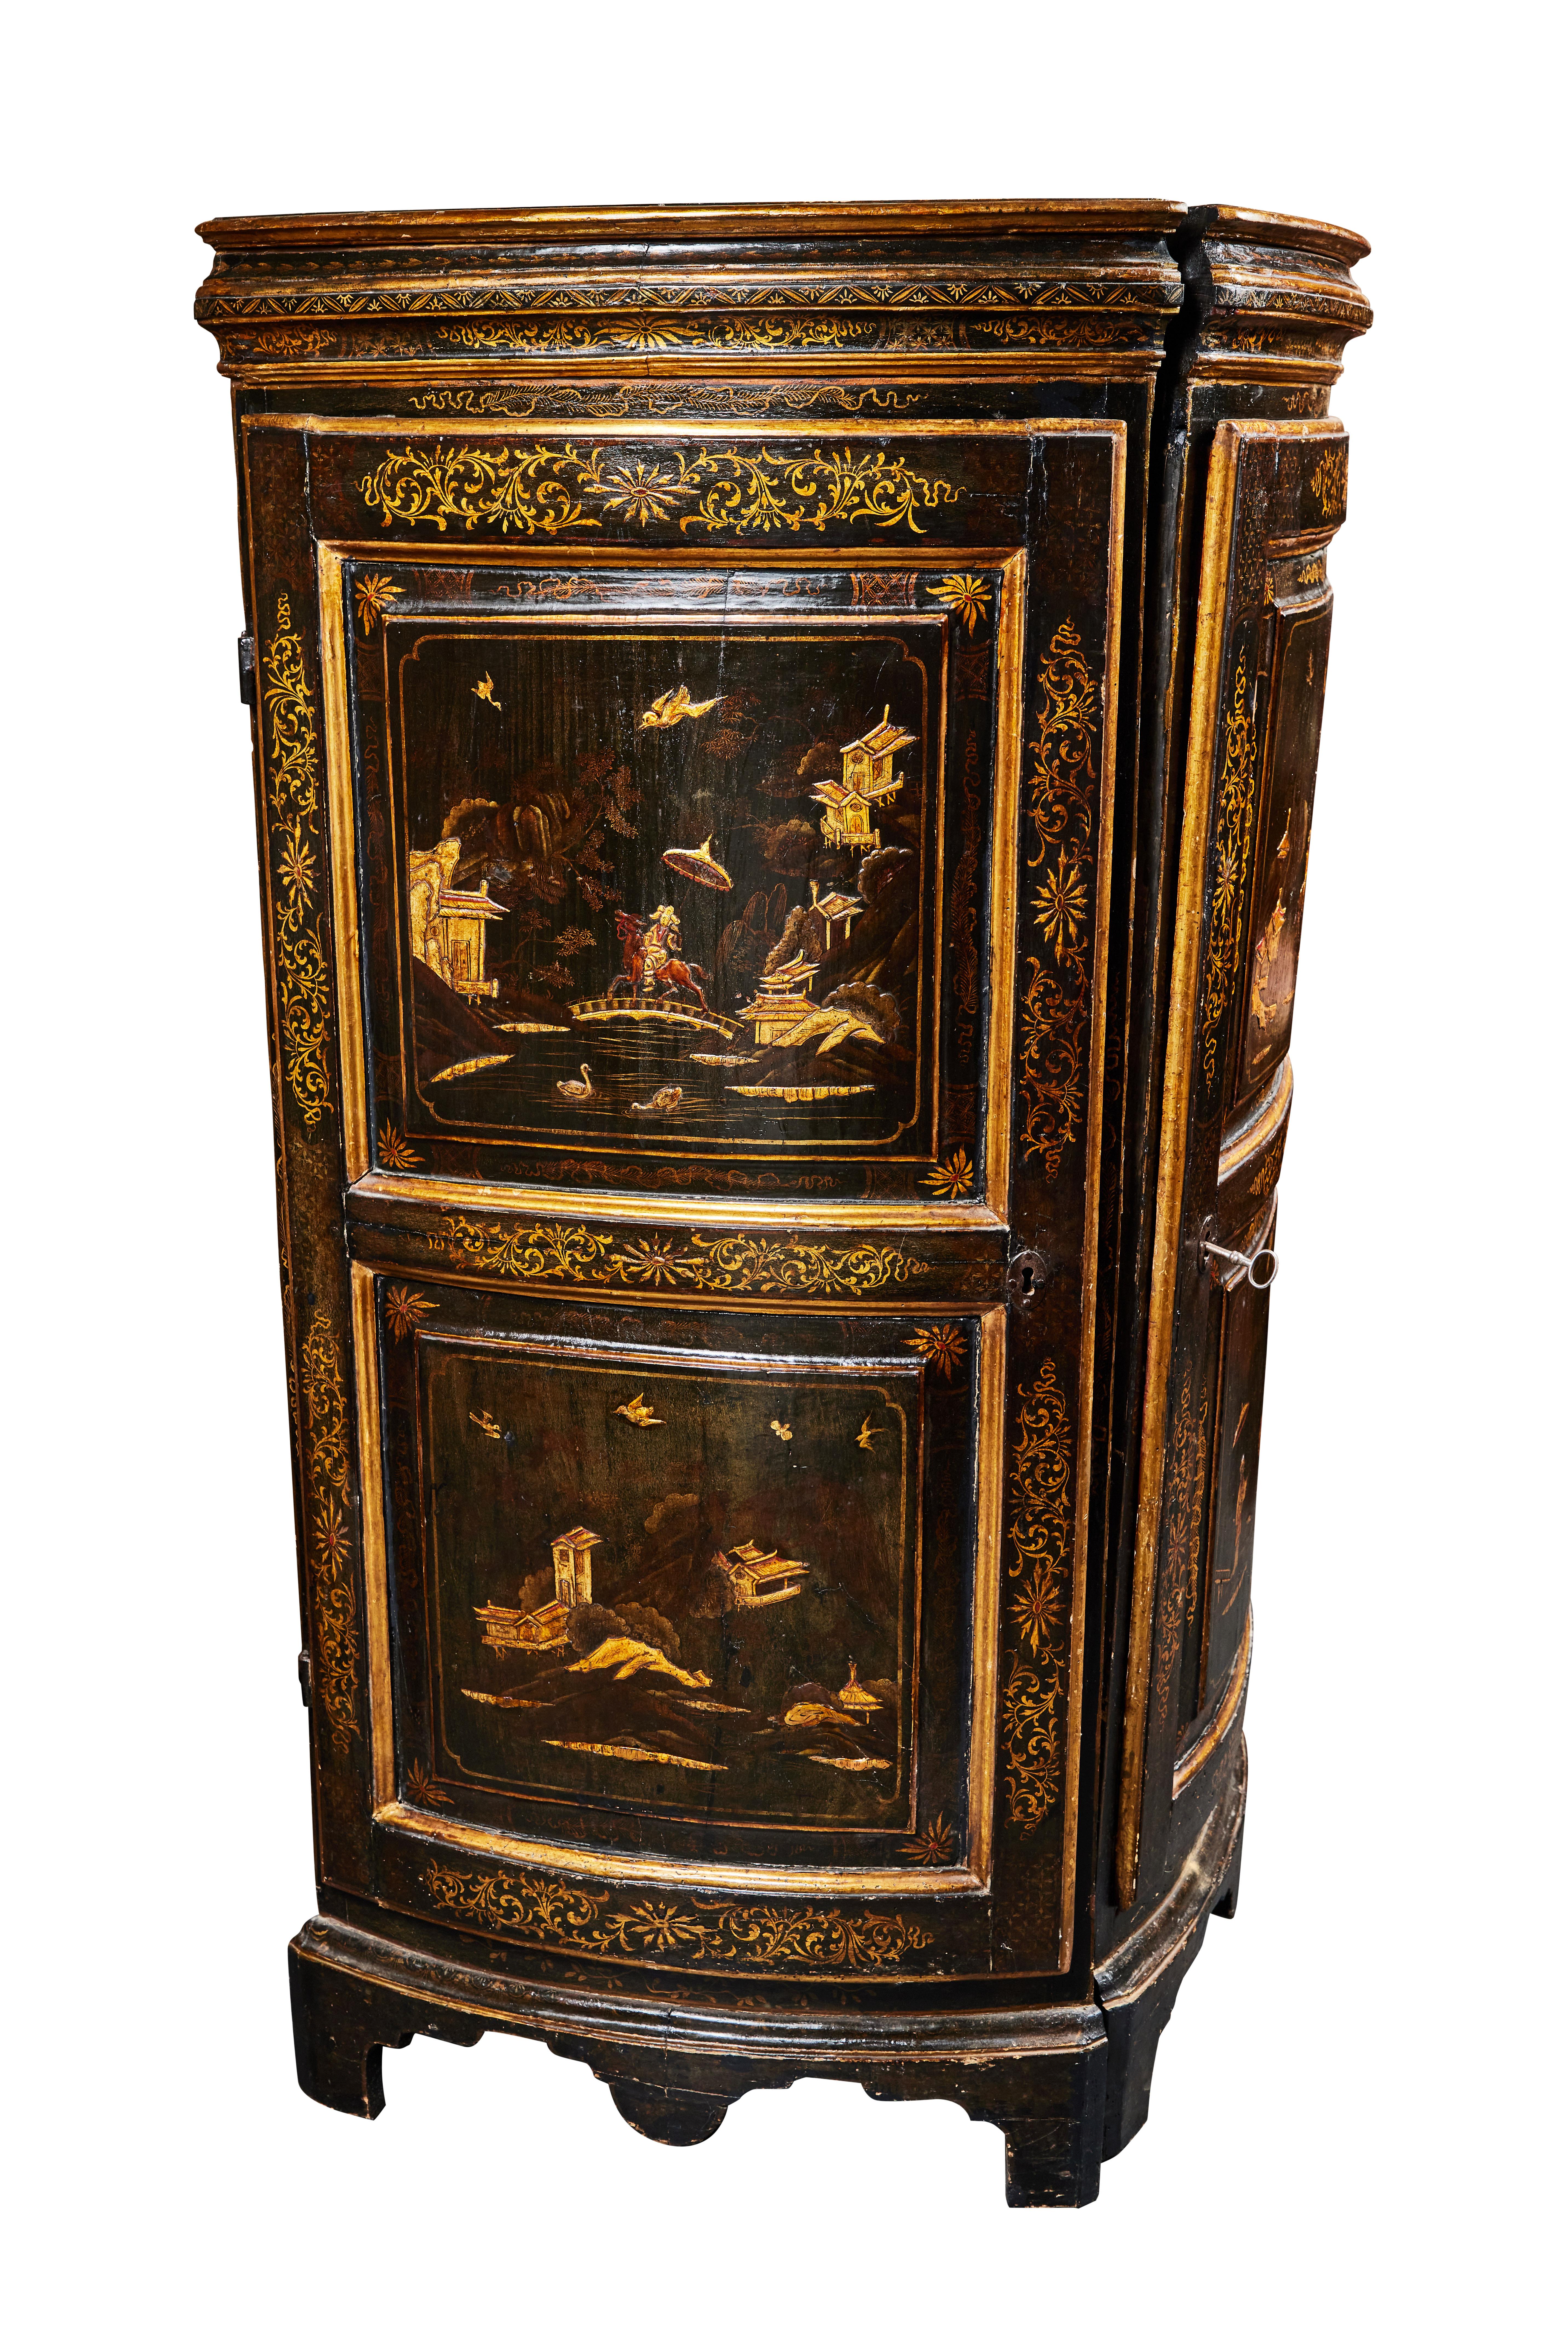 A pair of elegant, ebonized, lacquered, hand painted and parcel gilt, Chinoiserie decorated corner cabinets. Doors featuring two panels painted with unique scenes and embellished with foliate and floral details throughout.